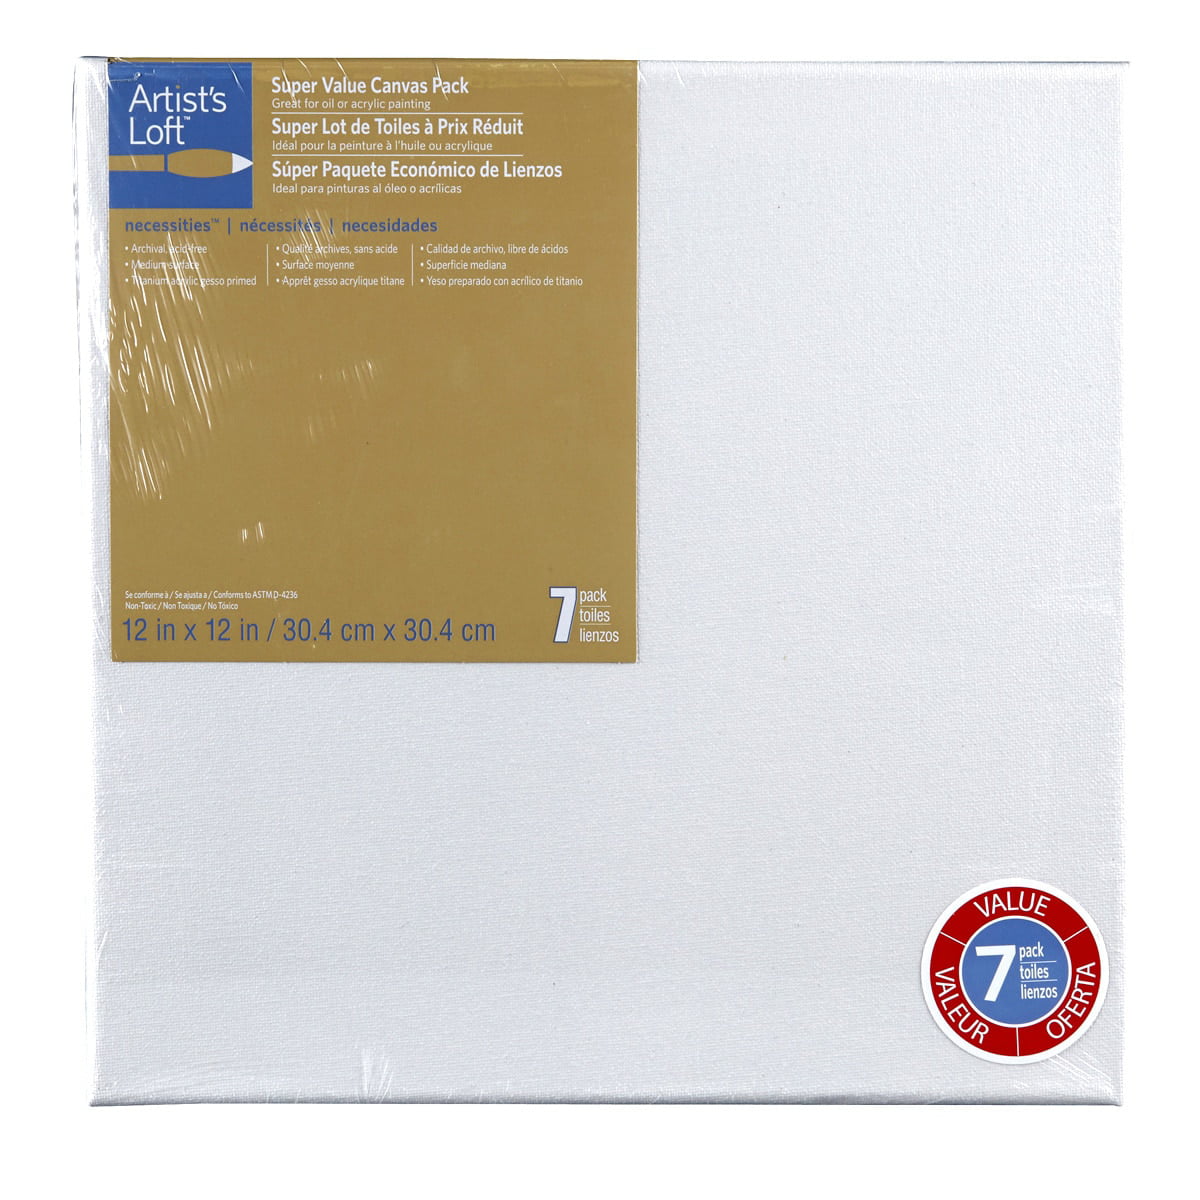 4 Packs: 6 ct. (24 total) 10 x 20 Super Value Canvas Pack by Artist's  Loft® Necessities™ 